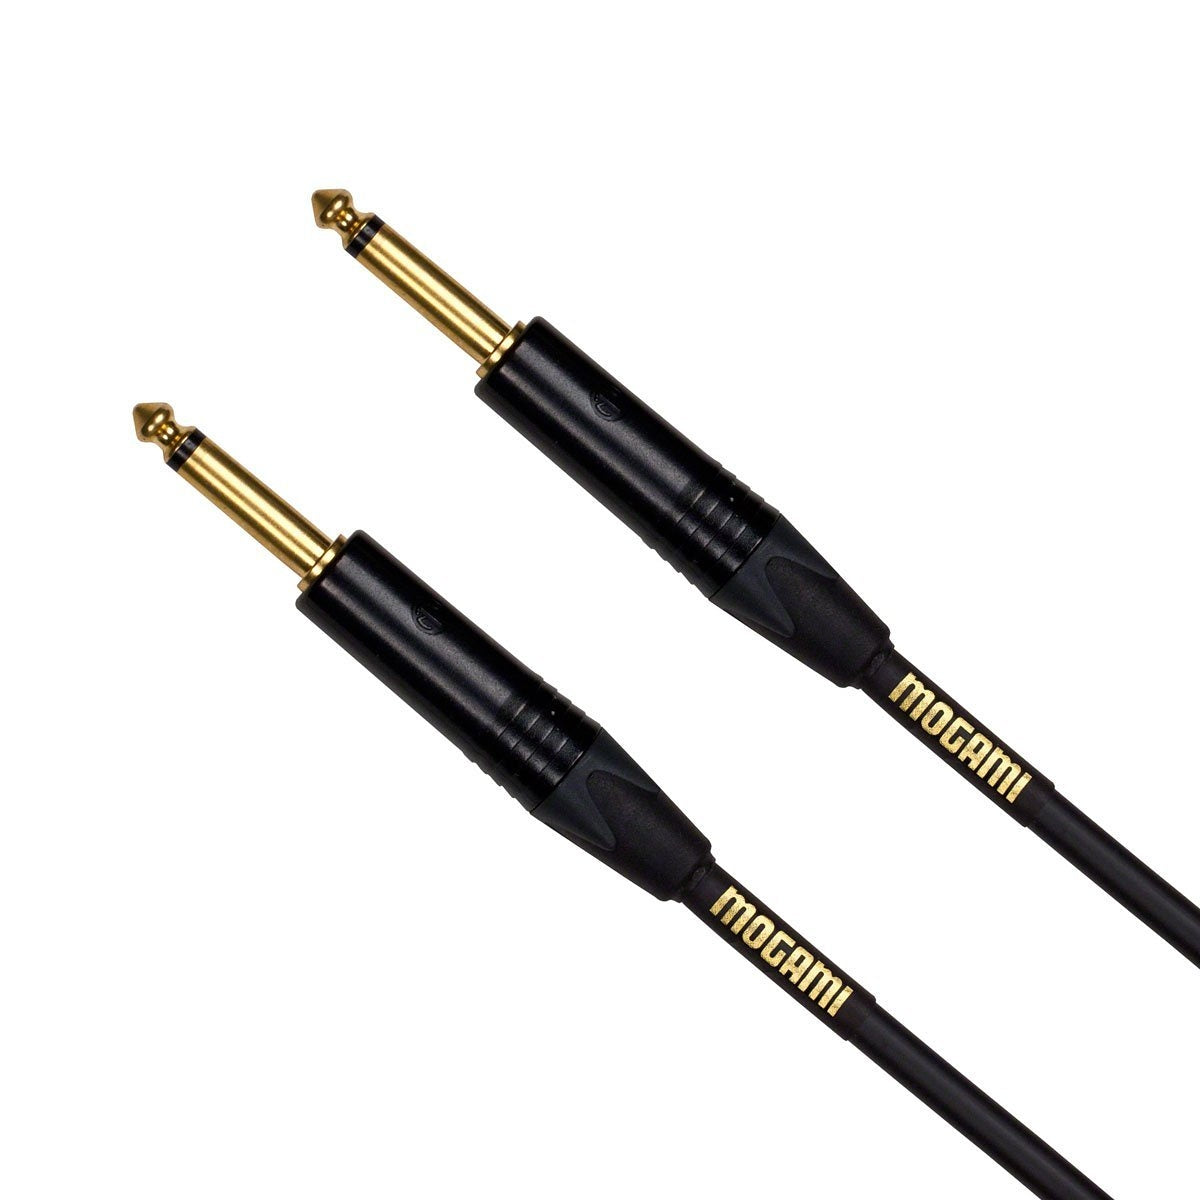 Mogami Gold Instrument-10 High Clarity Guitar and Instrument Cable Straight Plug, 10ft (Used)